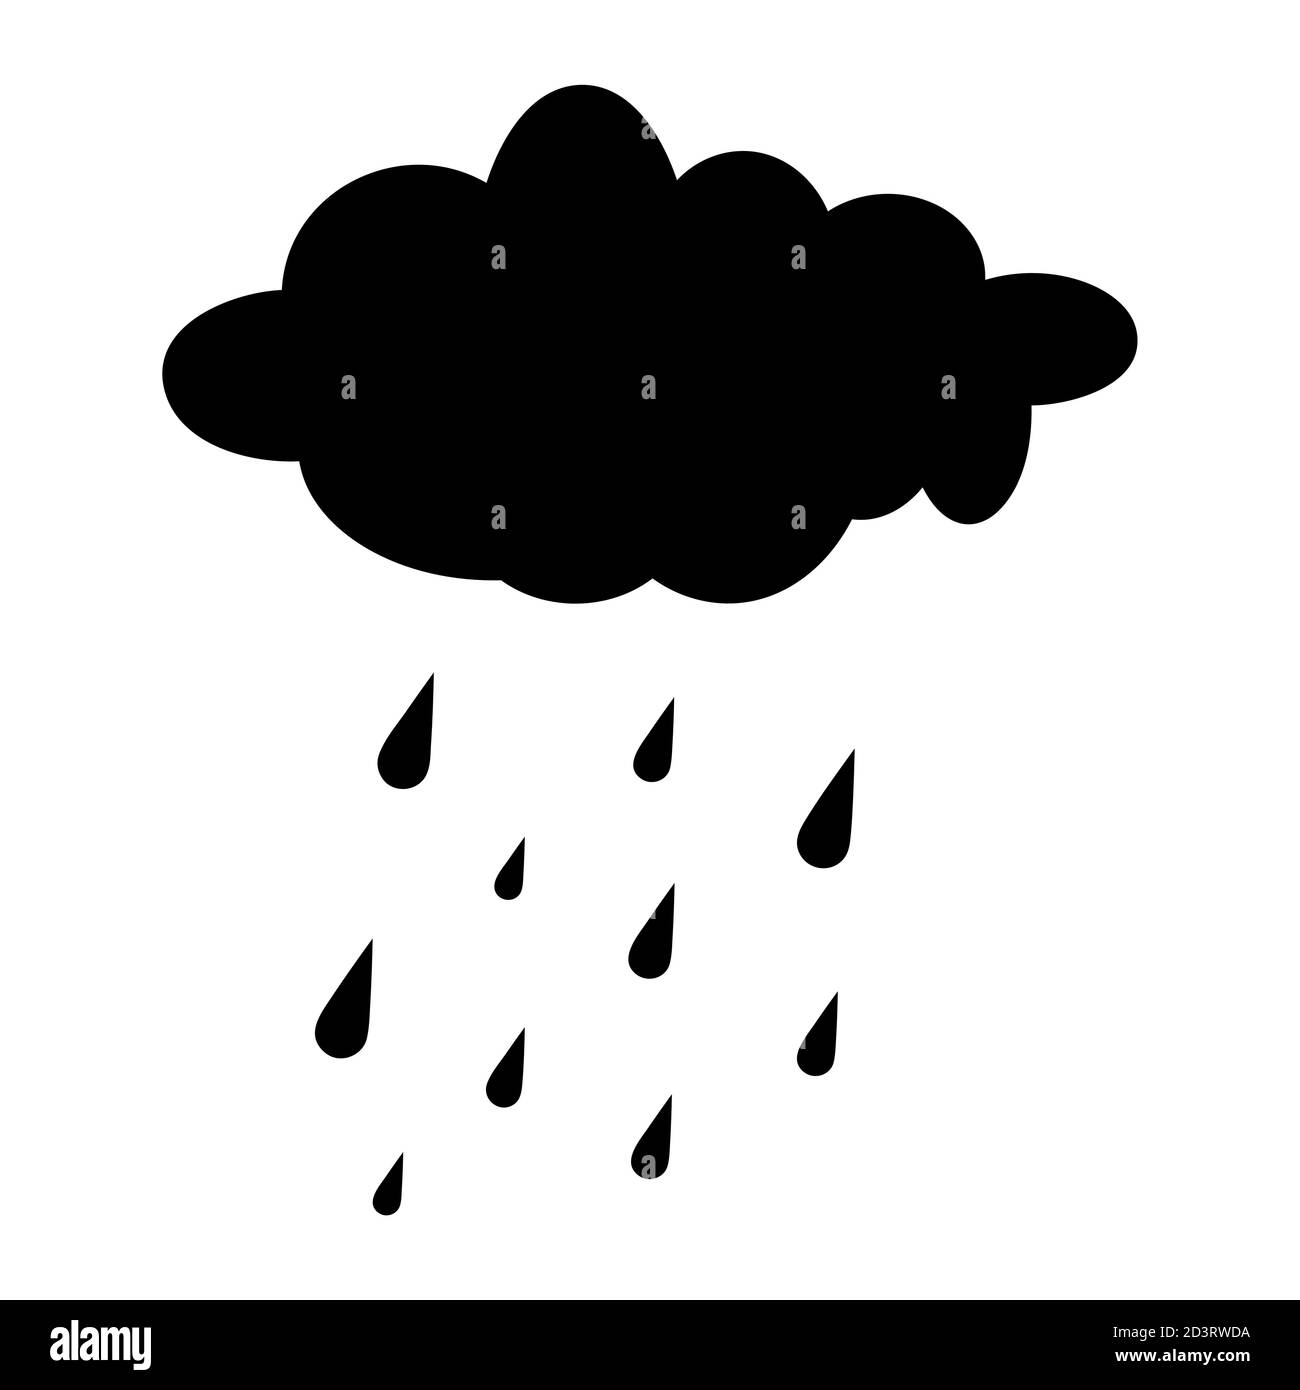 Rain cloud silhouette isolated on white. Cartoon, autumnal forecast clipart with water drops. Illustration of rainy cumulus with droplets falling down Stock Vector